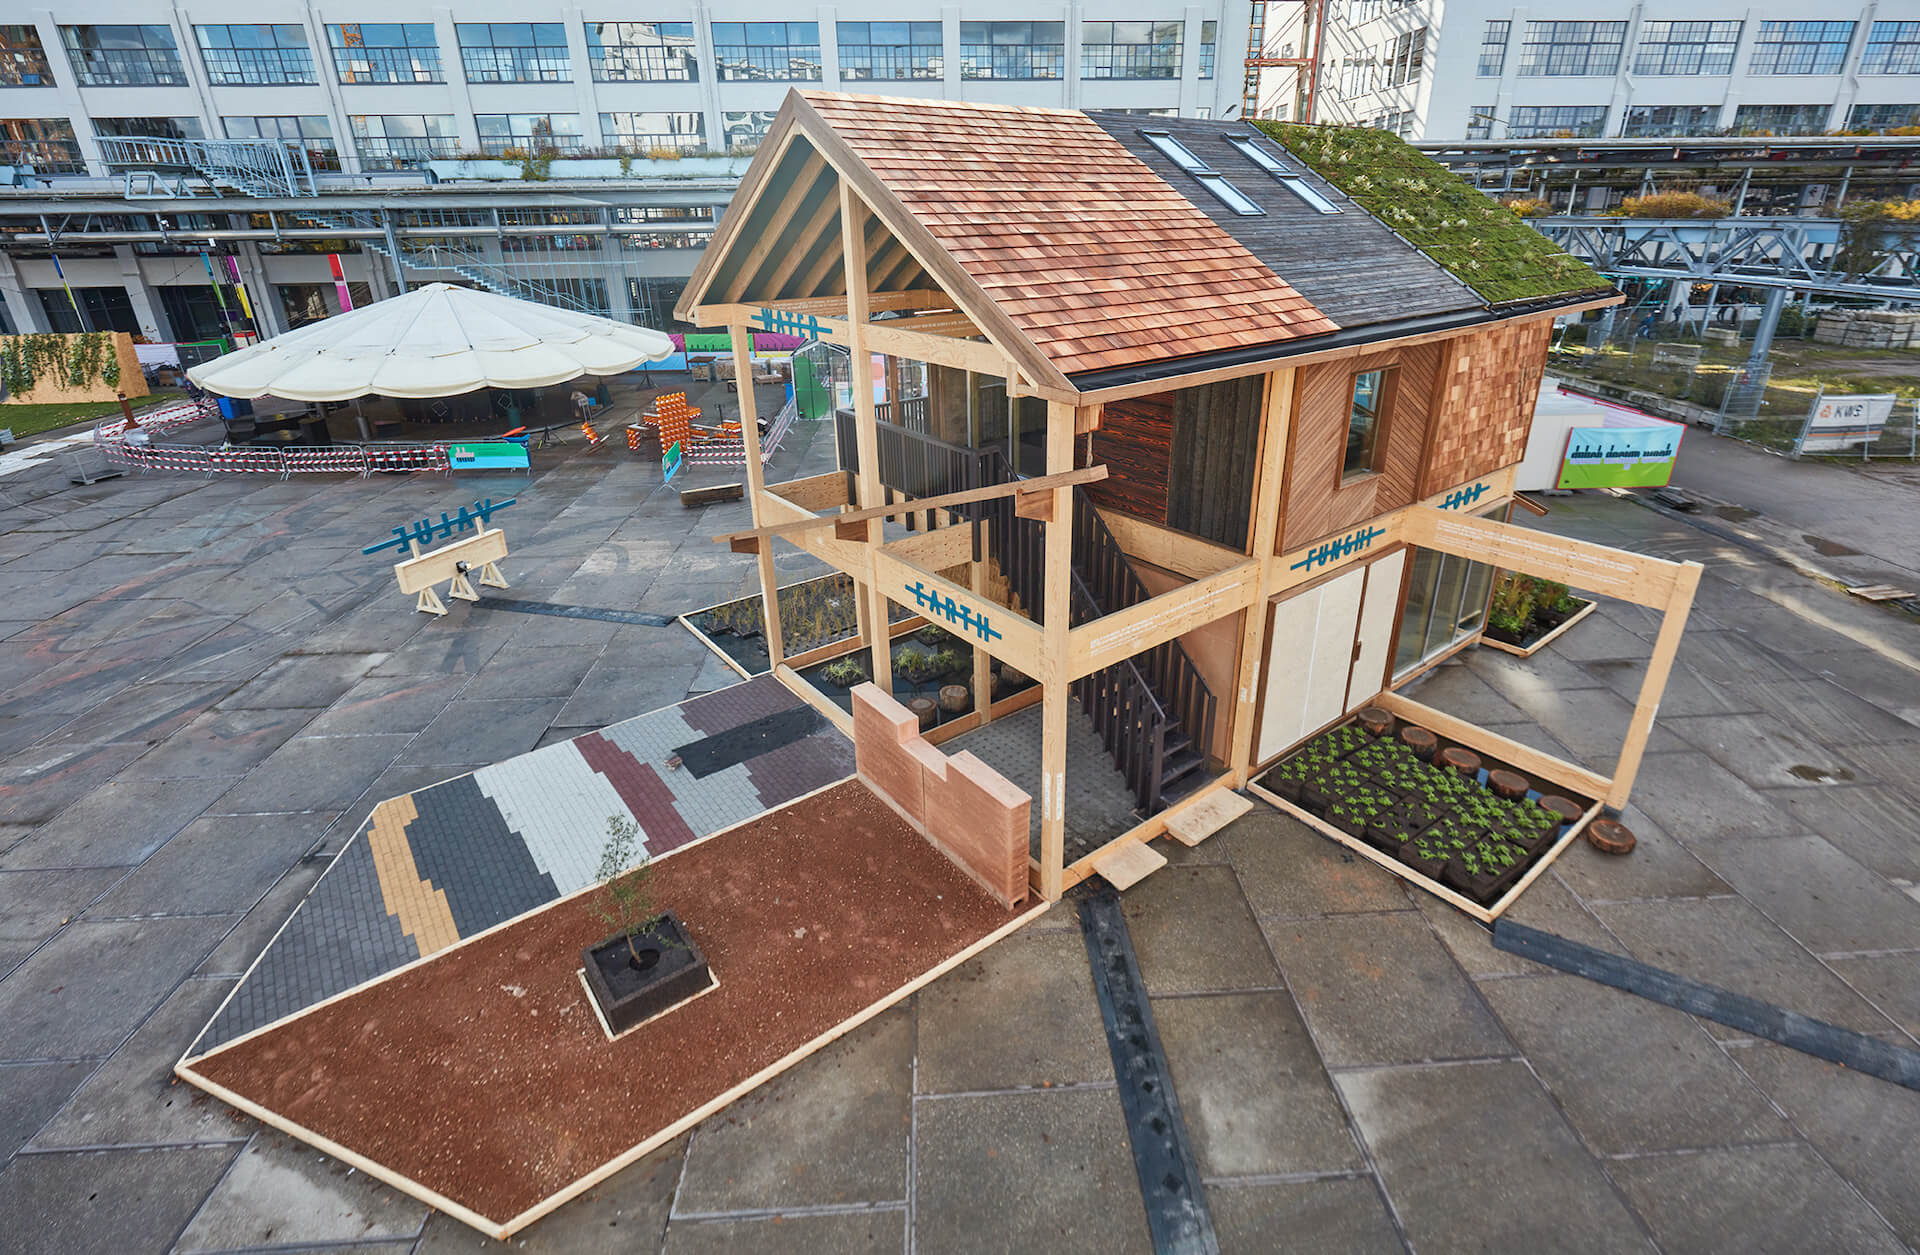 This biobased house is made from over 100 sustainable materials